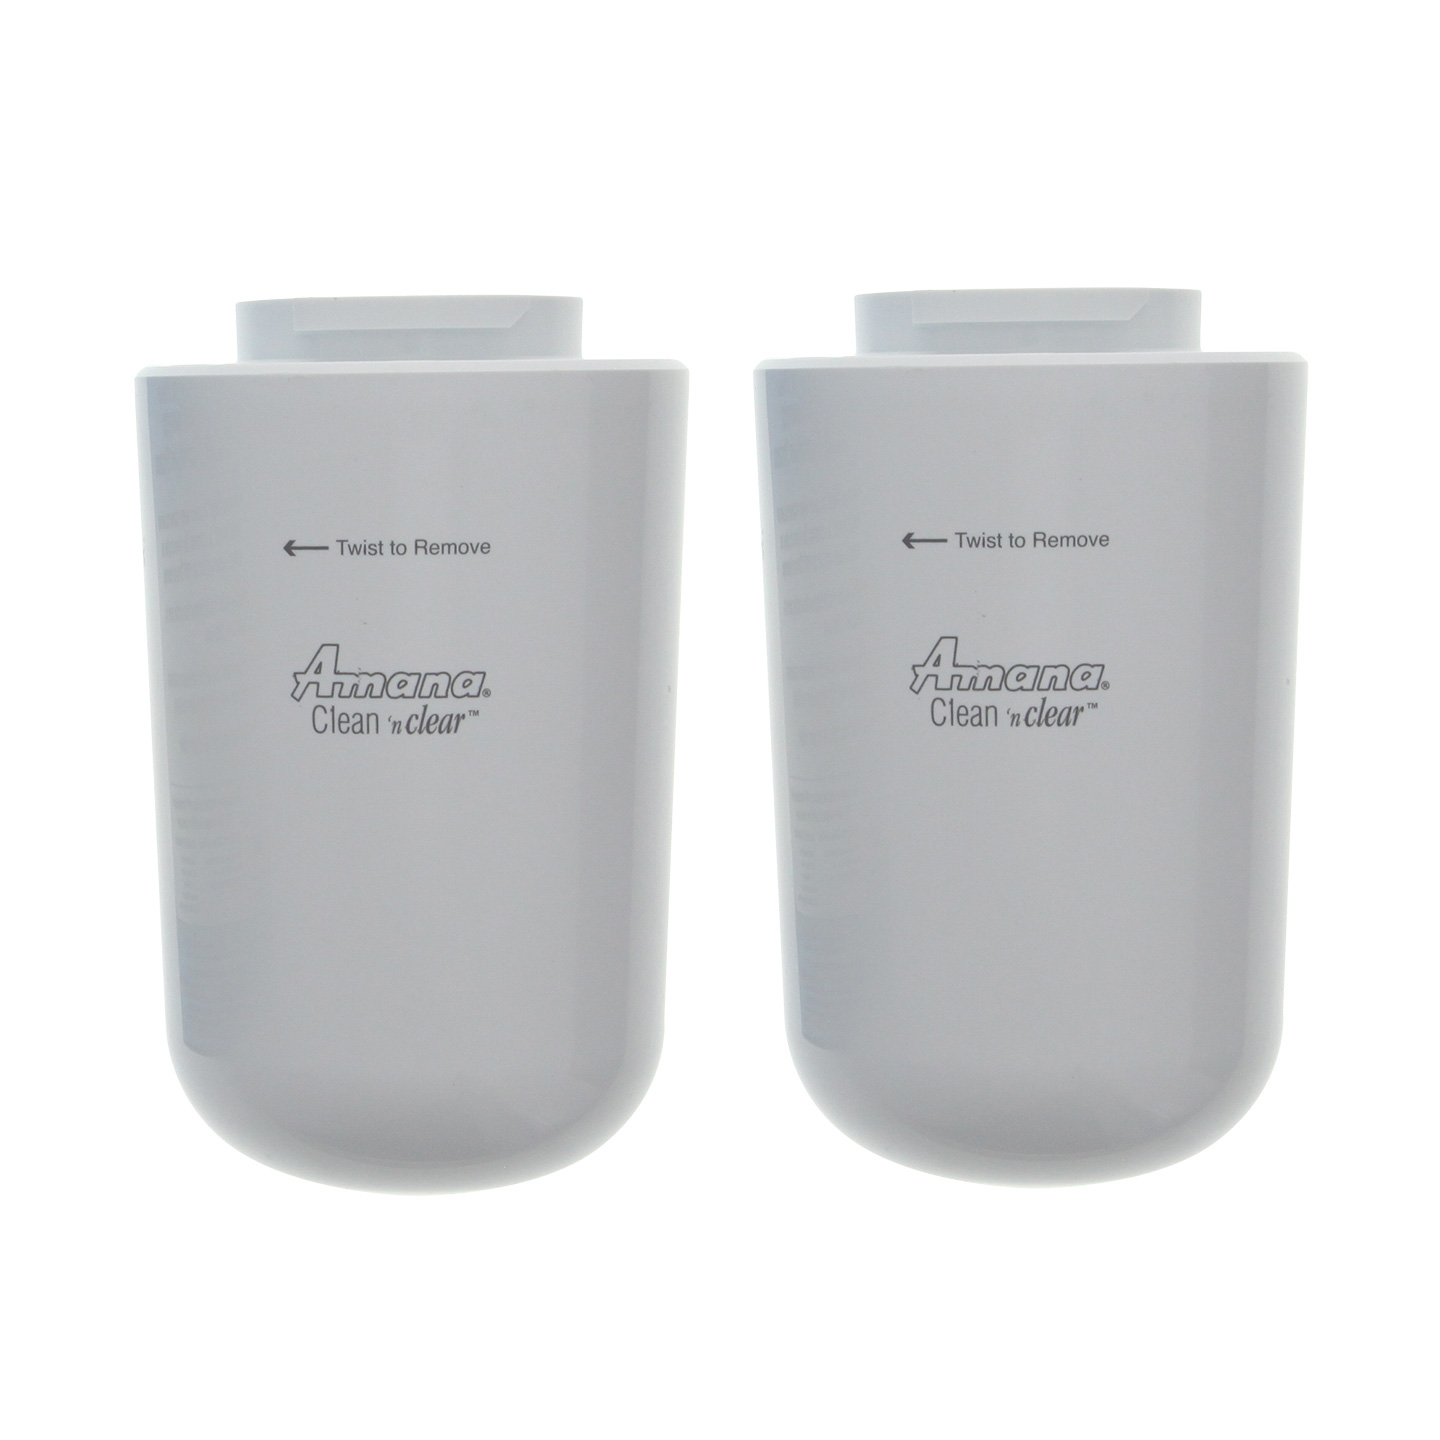 Amana 12527304 Clean 'n Clear Refrigerator Water Filter (2-Pack)